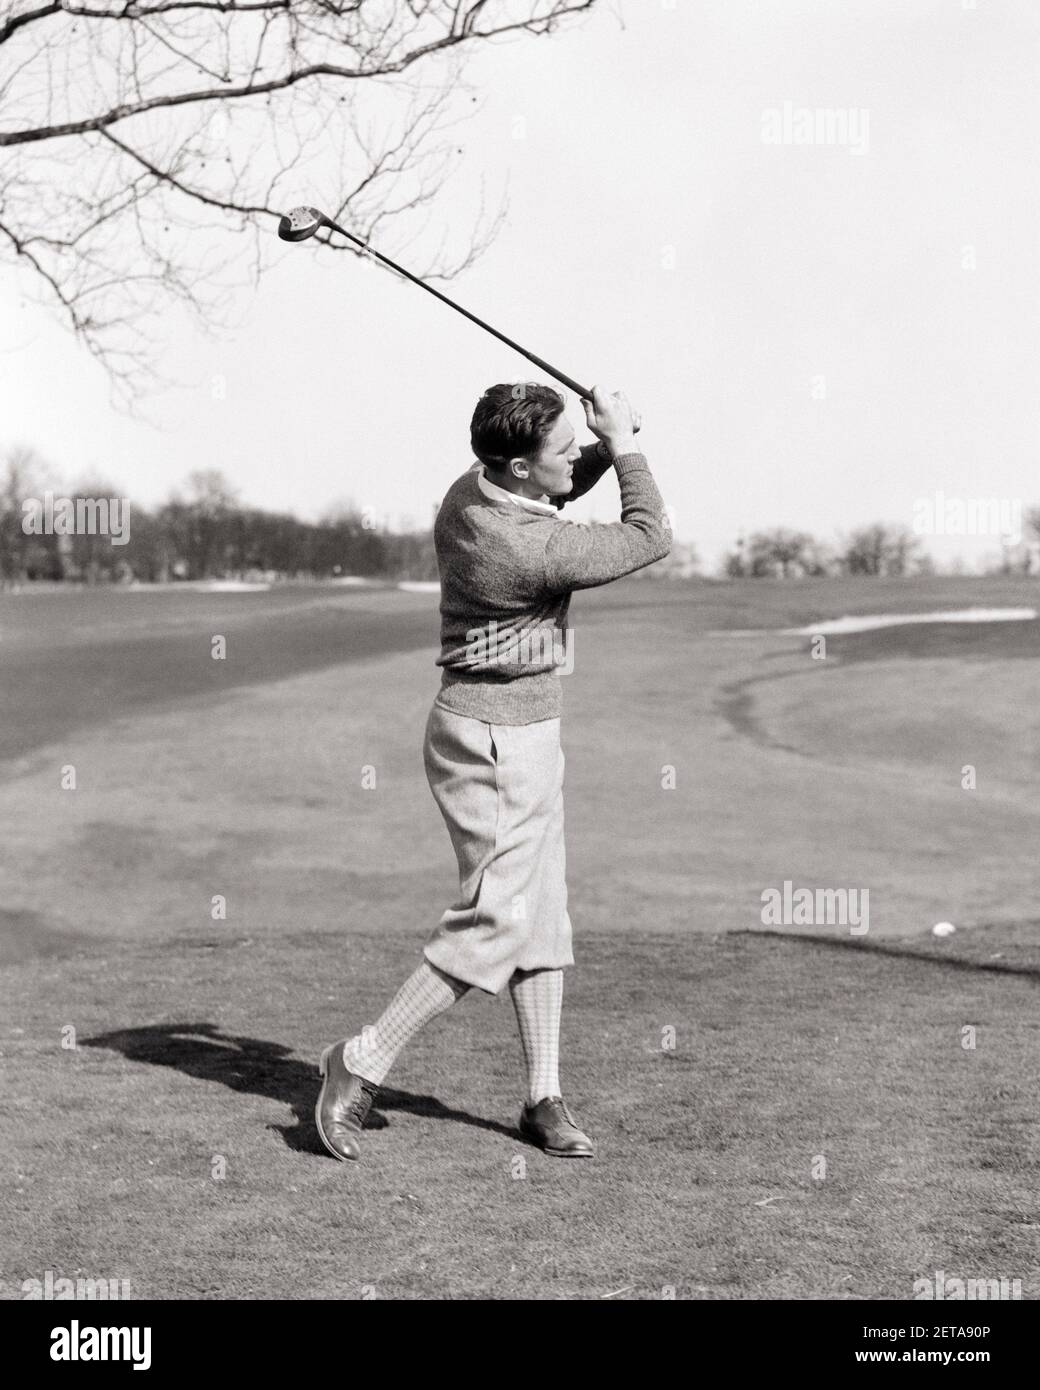 1920s 1930s MAN GOLFER FULL SWING TEEING OFF WEARING SWEATER PLUS FOURS - g1656 HAR001 HARS COPY SPACE FULL-LENGTH PHYSICAL FITNESS PERSONS MALES GOLFING ATHLETIC B&W ACTIVITY PHYSICAL GOLFERS LEISURE STRENGTH RECREATION ATHLETES FLEXIBILITY LINKS MUSCLES STYLISH FOURS PLUS TEEING YOUNG ADULT MAN BLACK AND WHITE CAUCASIAN ETHNICITY HAR001 OLD FASHIONED Stock Photo